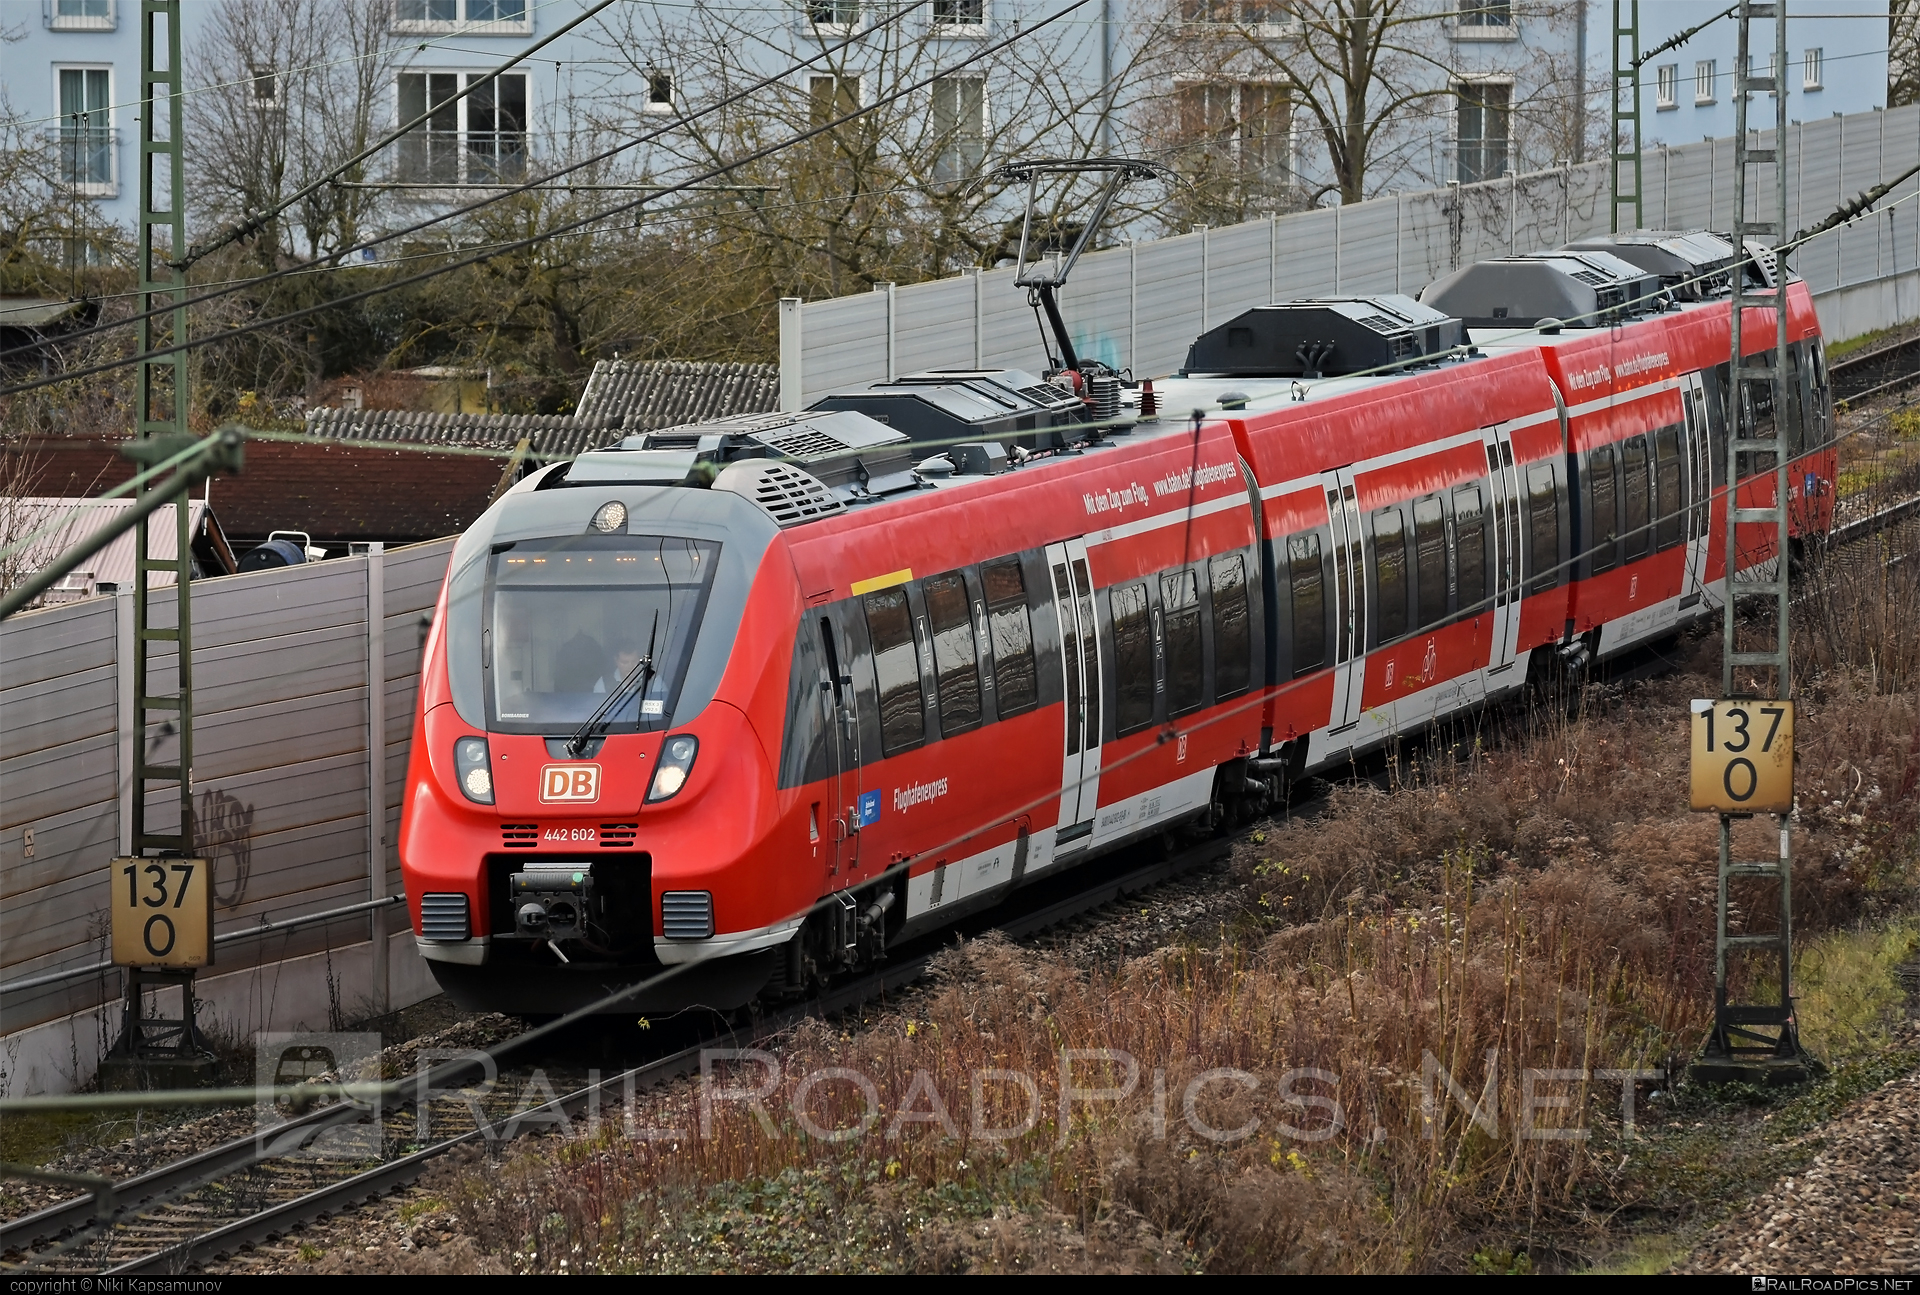 Bombardier Talent 2 - 442 602 operated by DB Regio AG #DBregio #DBregioAG #bahnlandbayern #bombardier #bombardiertalent #bombardiertalent2 #db #deutschebahn #flughafenexpress #talent2